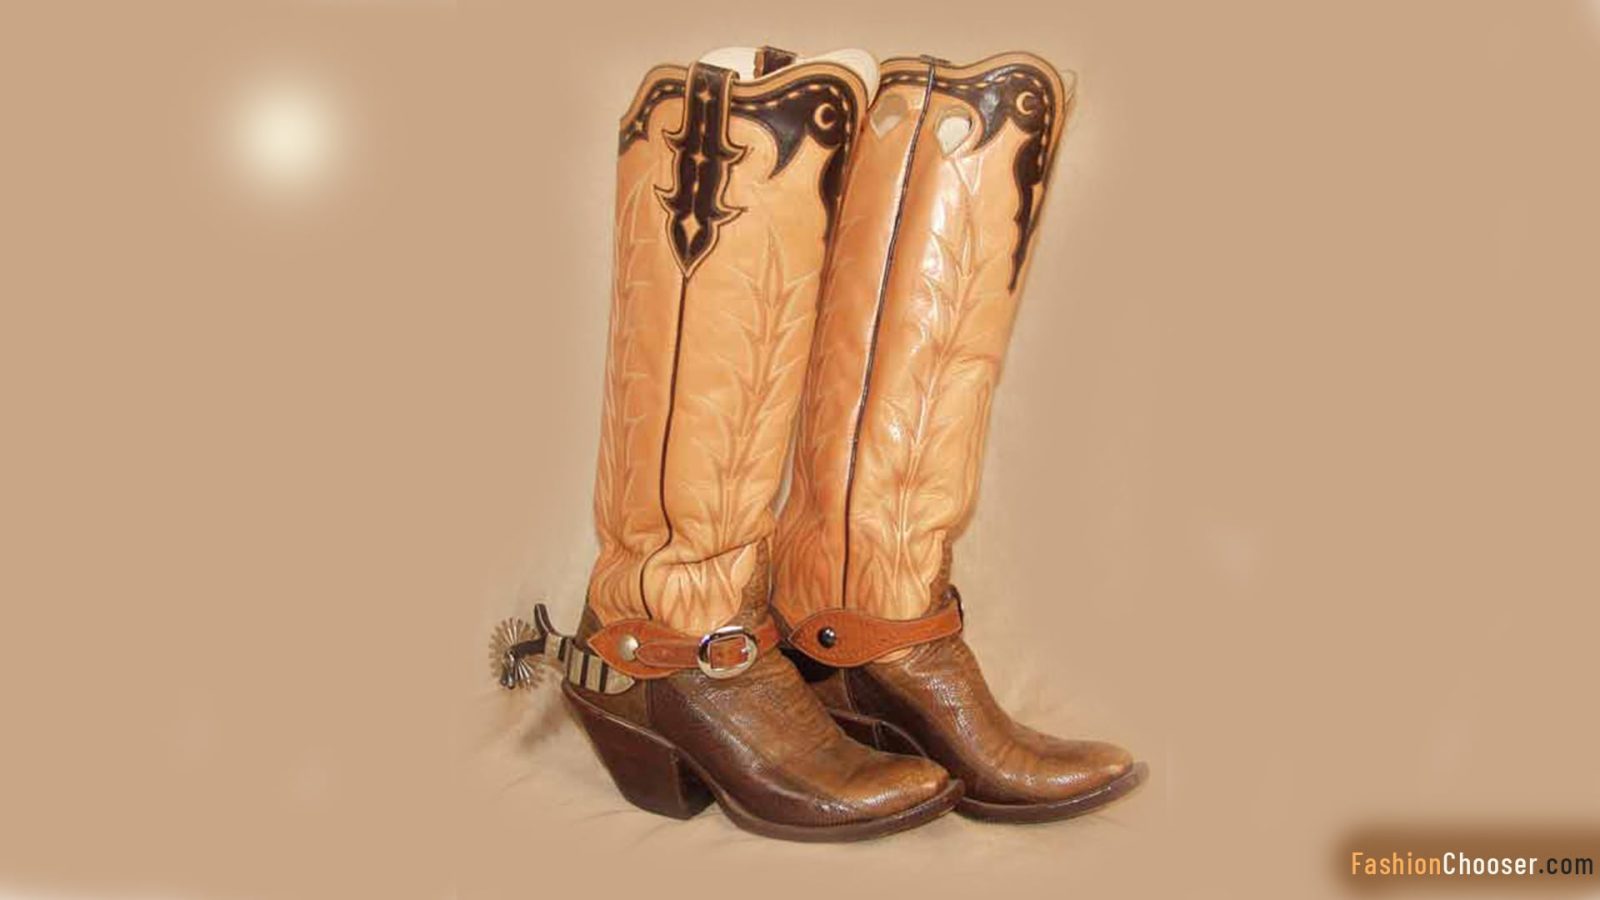 Chappell boots are comfortable cowboy shoes brand